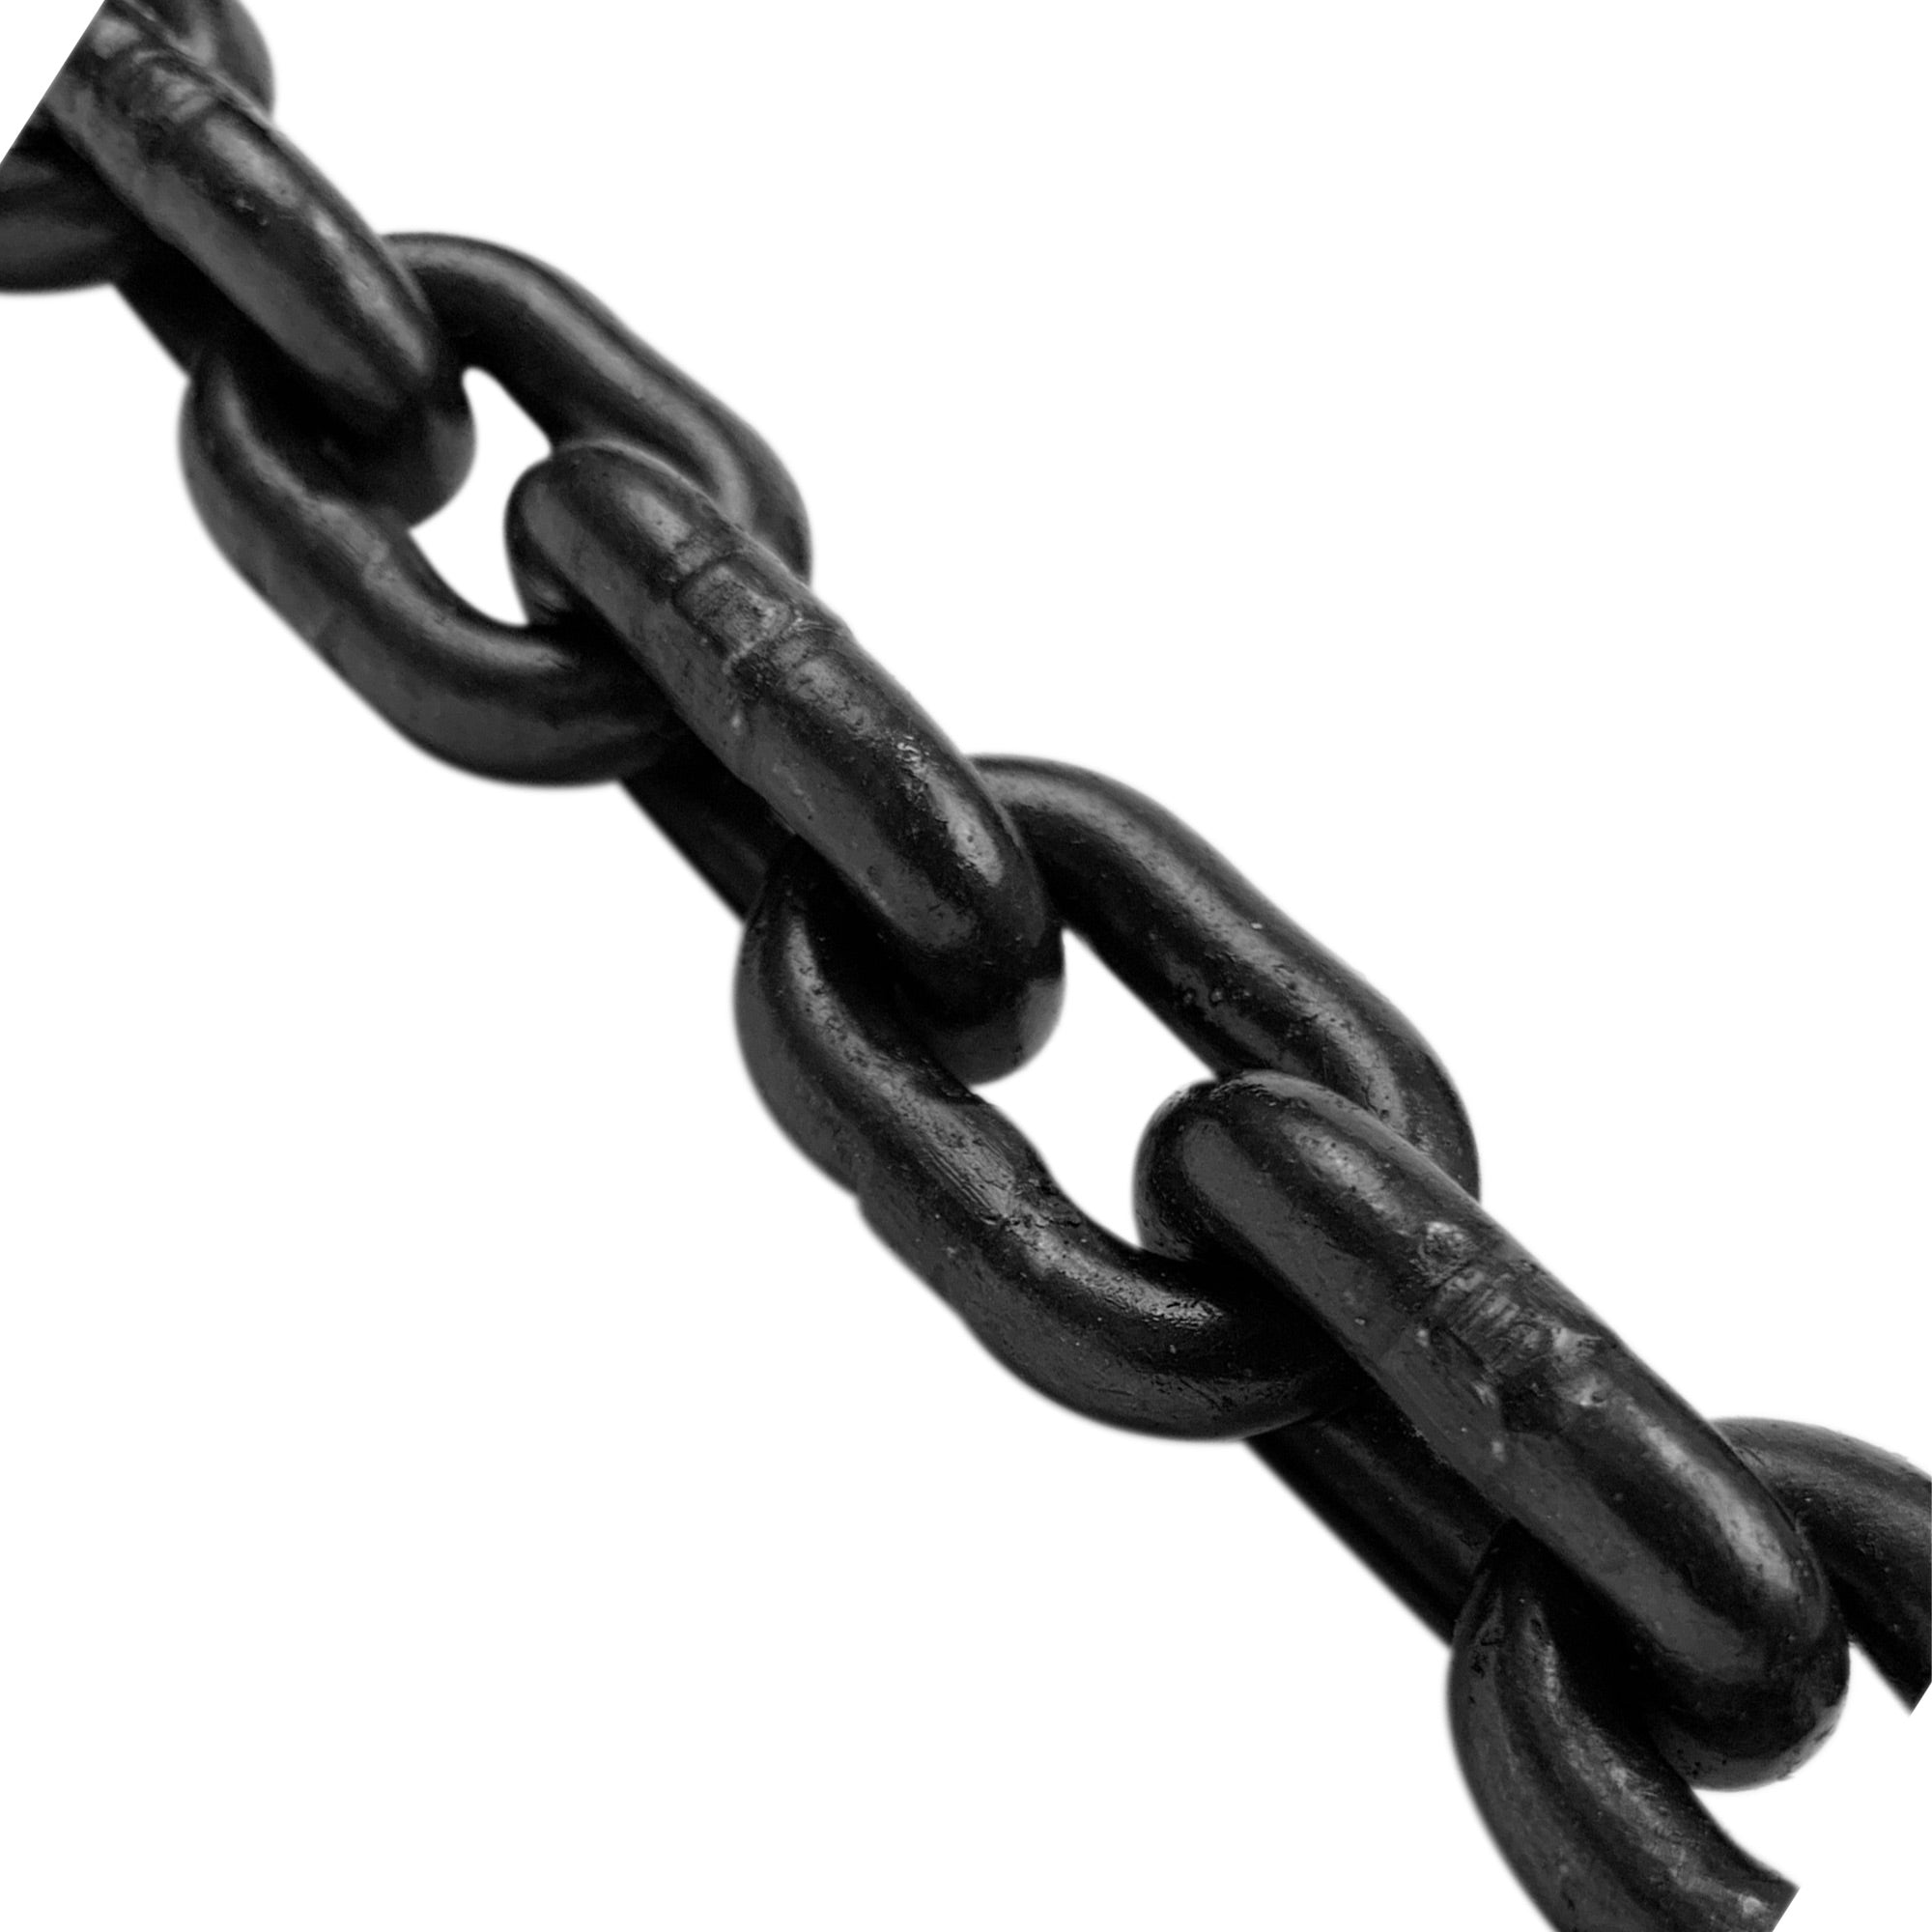 Replacement 30FT Chain for Electric Chain Hoist (FO-4335 and FO-4440) - FO4445